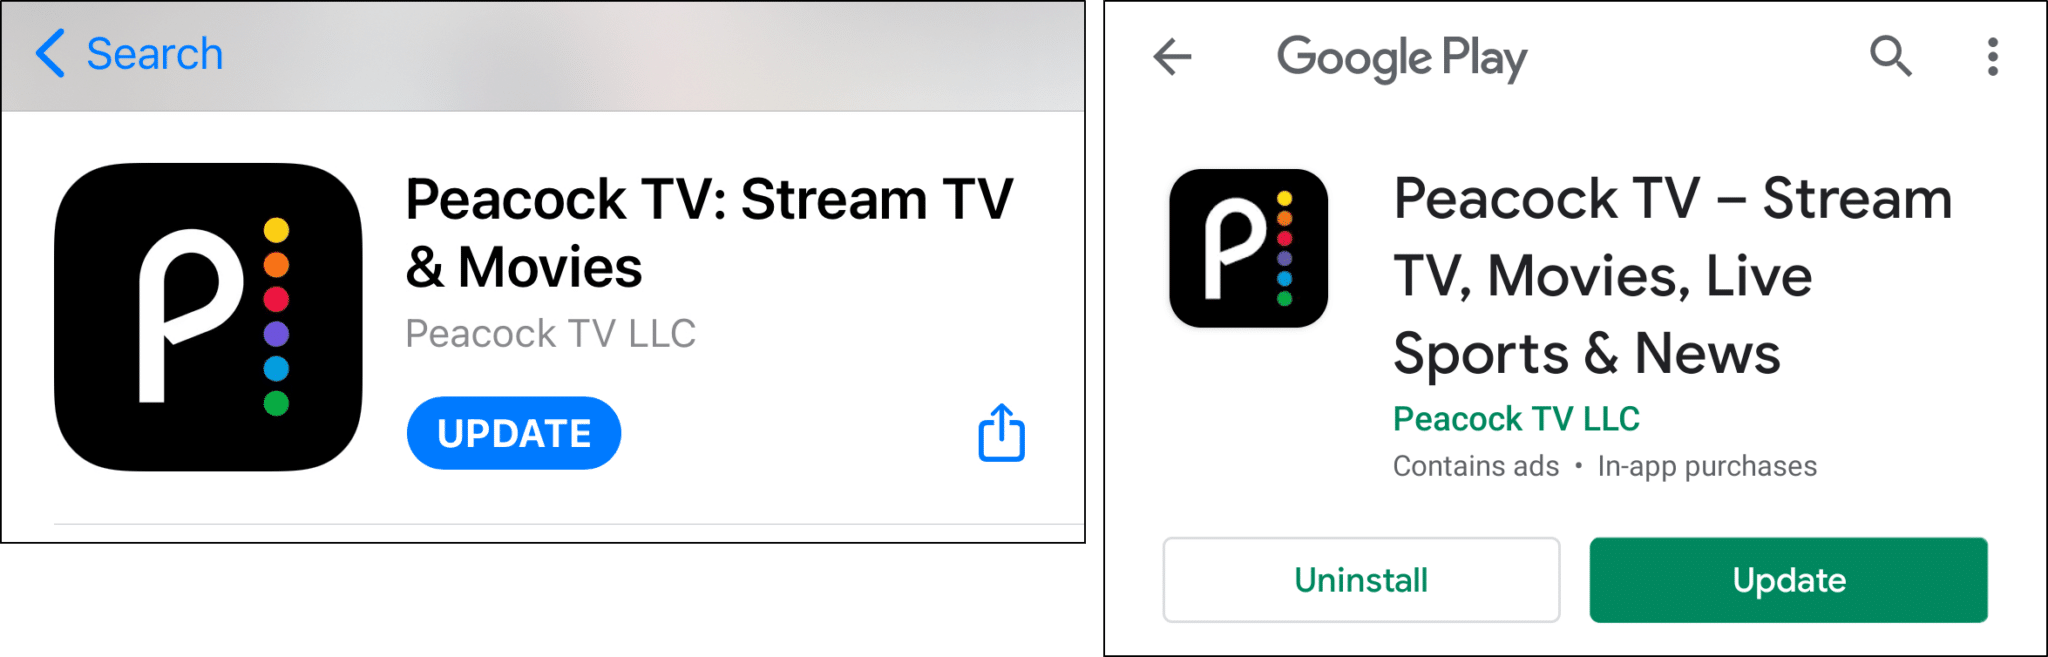 update Peacock TV app to fix Peacock TV buffering, not loading or working